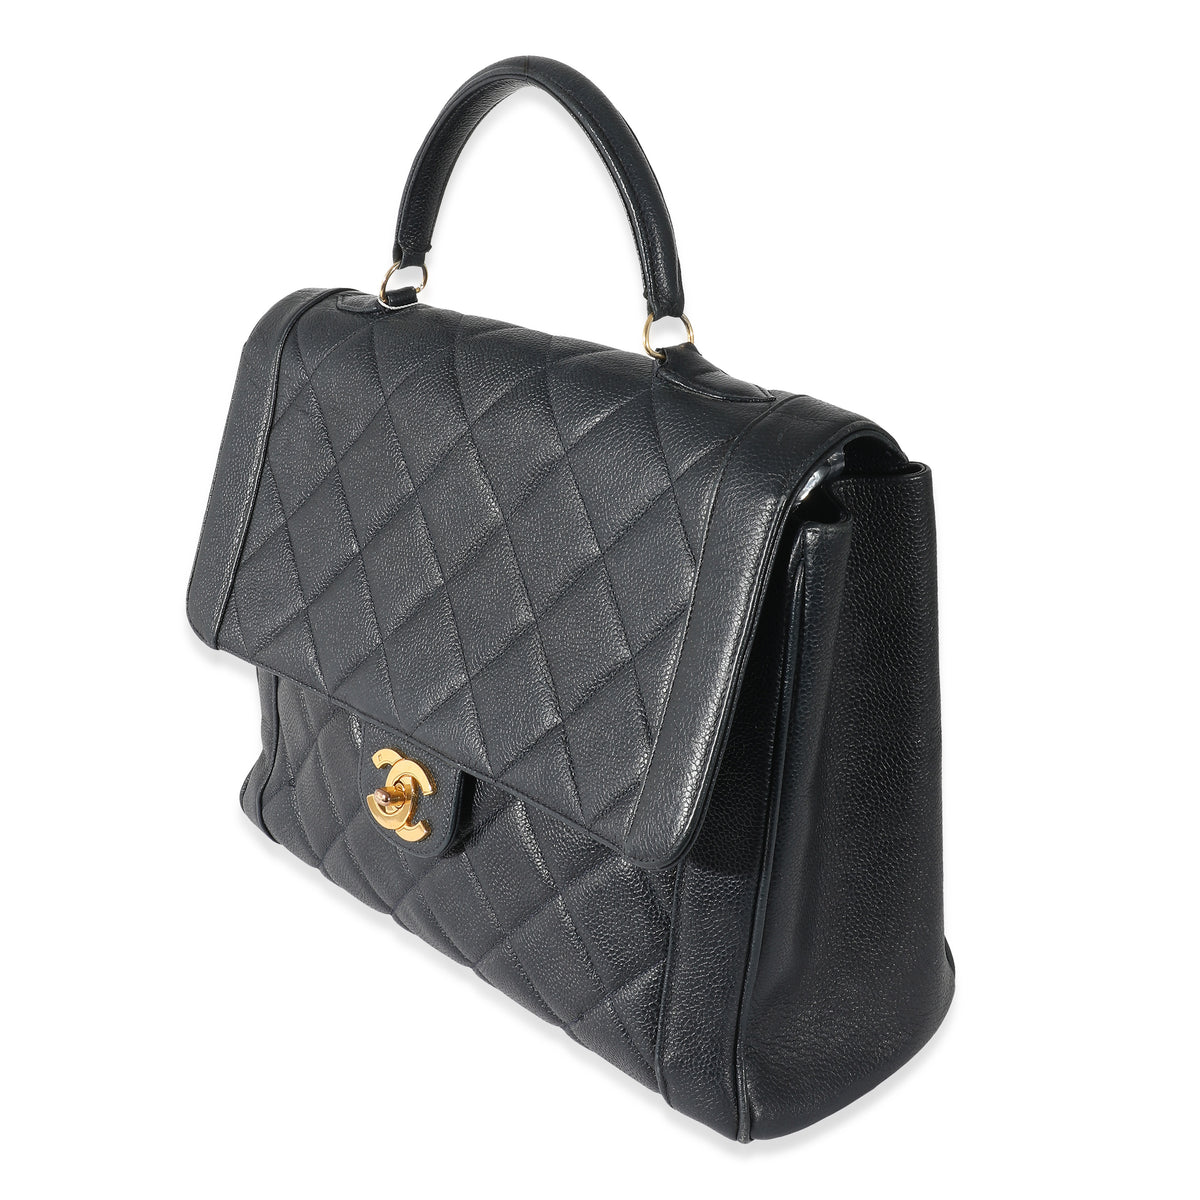 Chanel Black Quilted Caviar Large Coco Top Handle Flap Bag, myGemma, QA